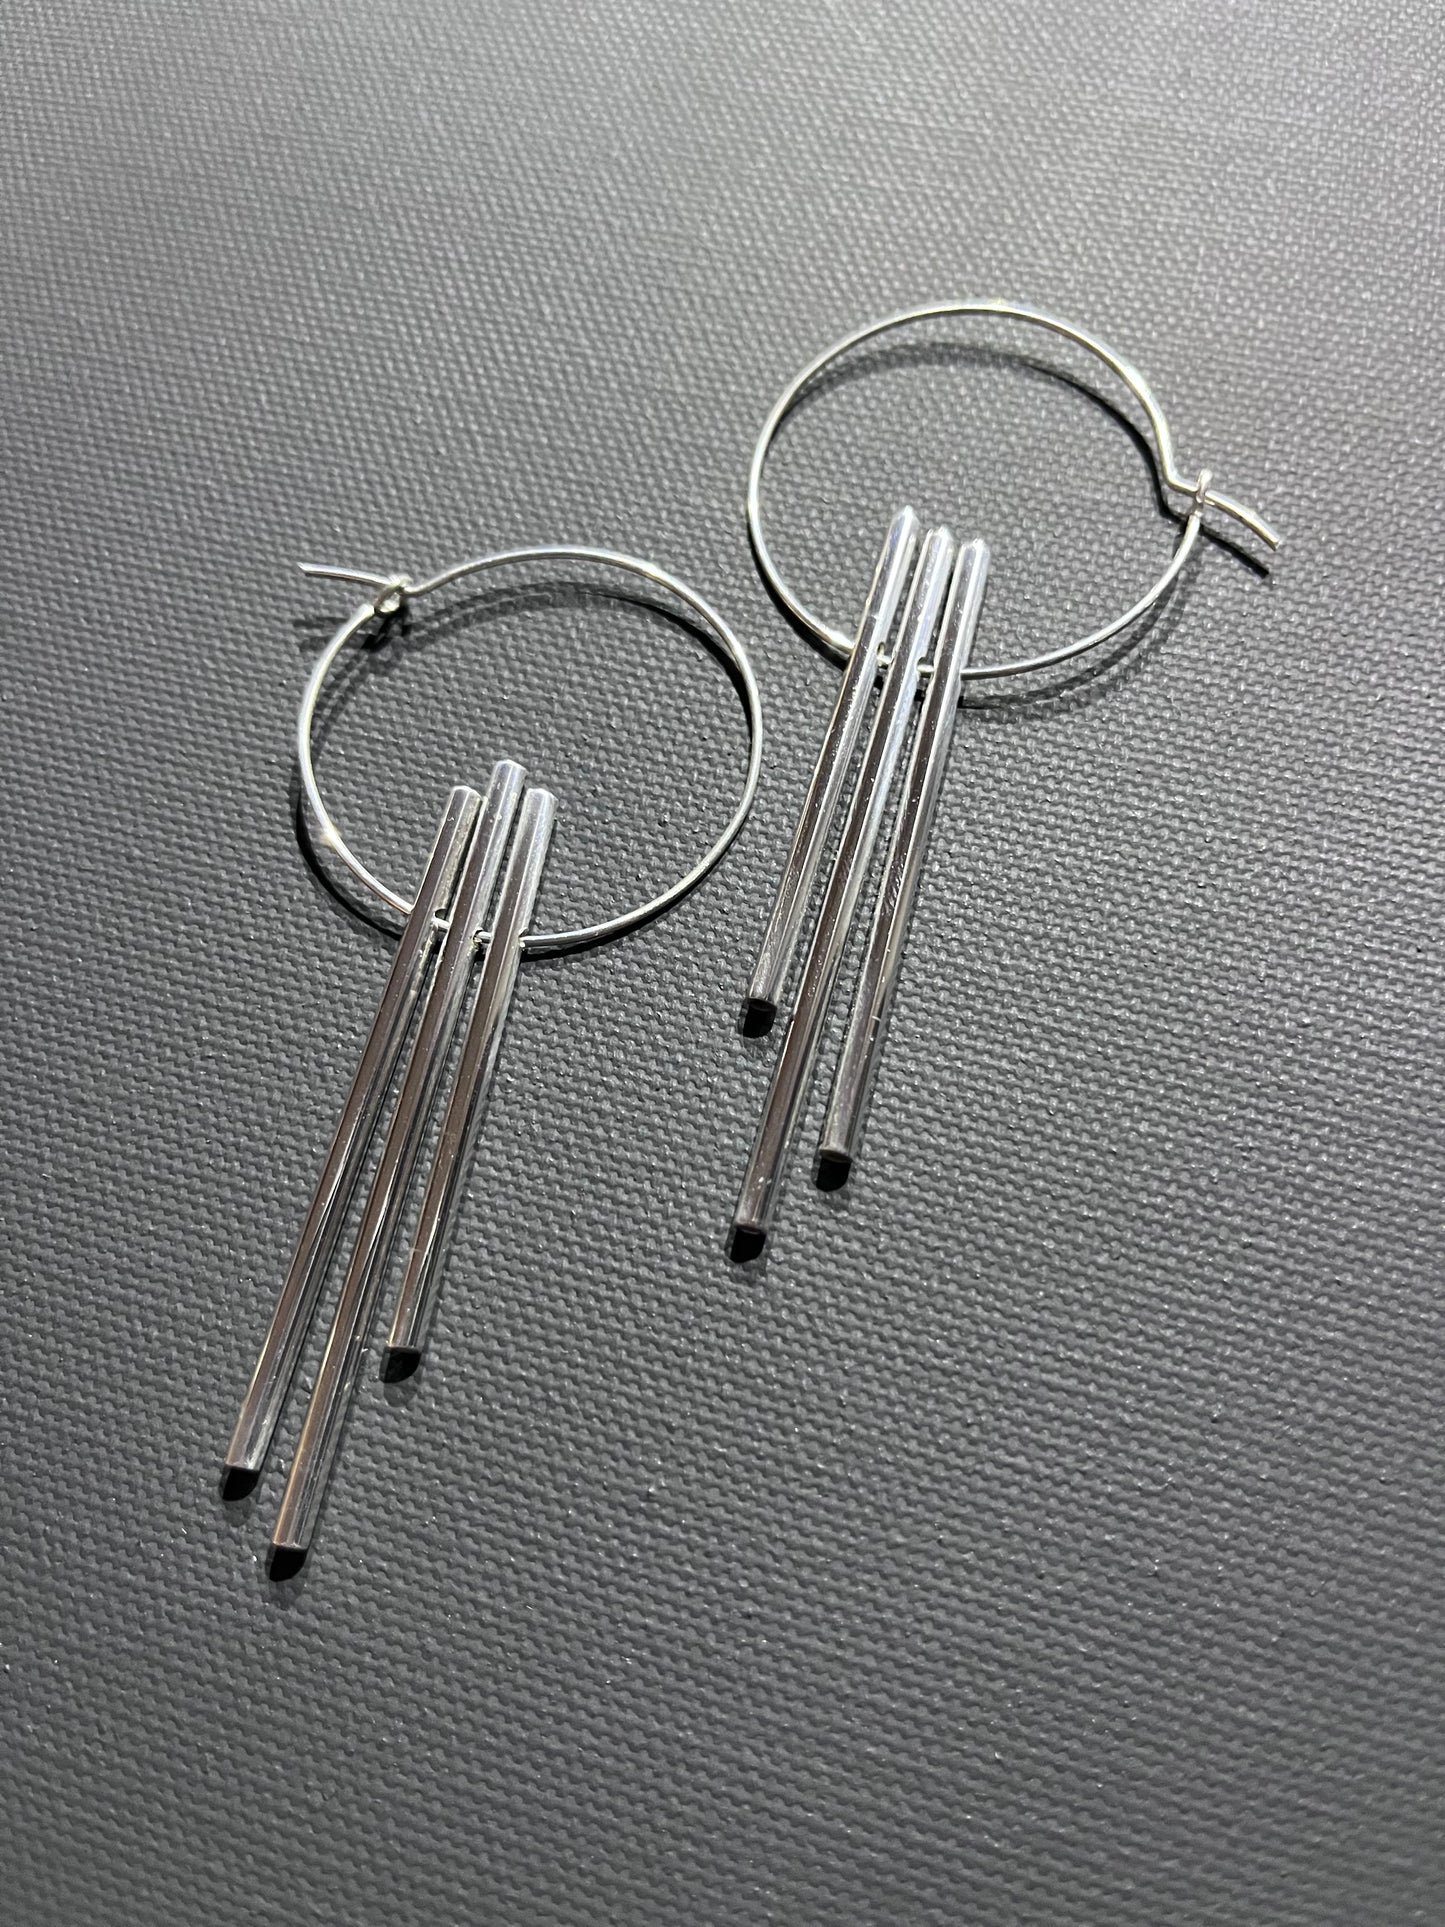 Trinity Earrings with Wire Hoop and Chime Inspired Drop